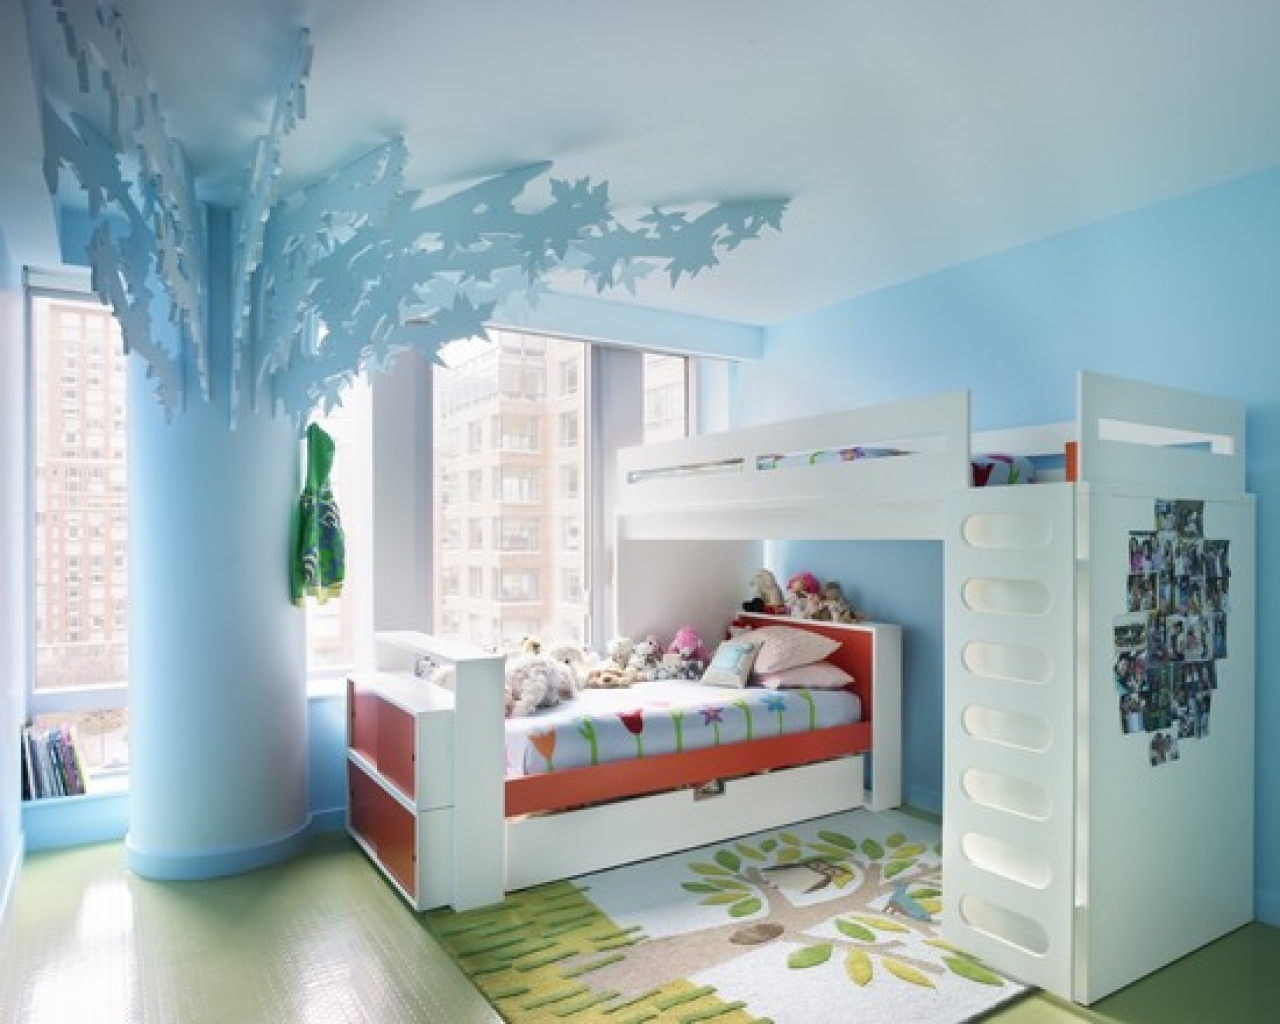 Childrens Bedroom Ideas for Small Bedrooms - Amazing Home Design and ...